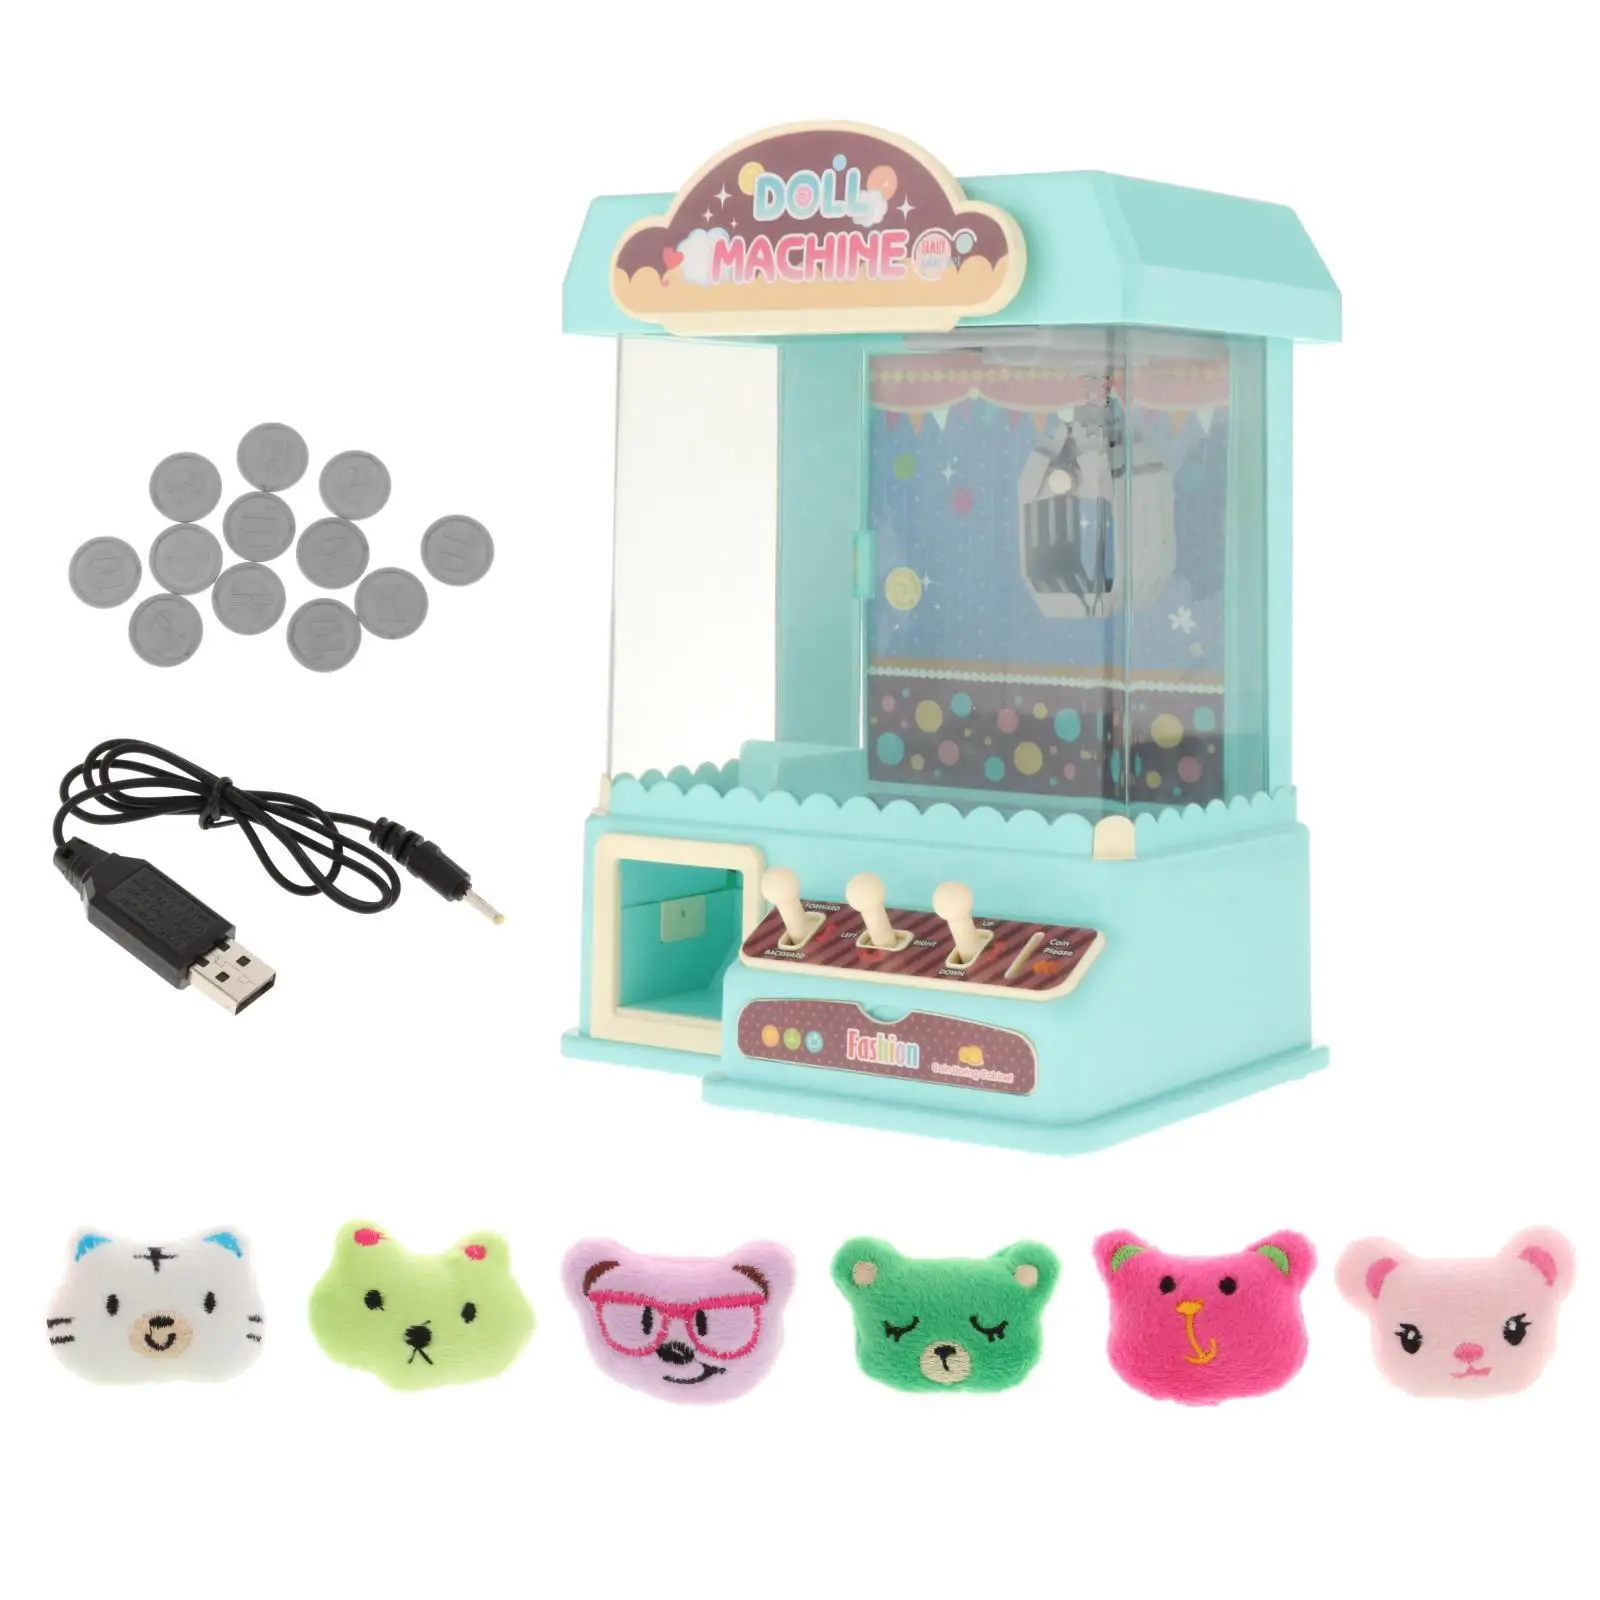 Manual Claw Machine Toy with Lights & Sounds Mini Arcade Machine for Kids